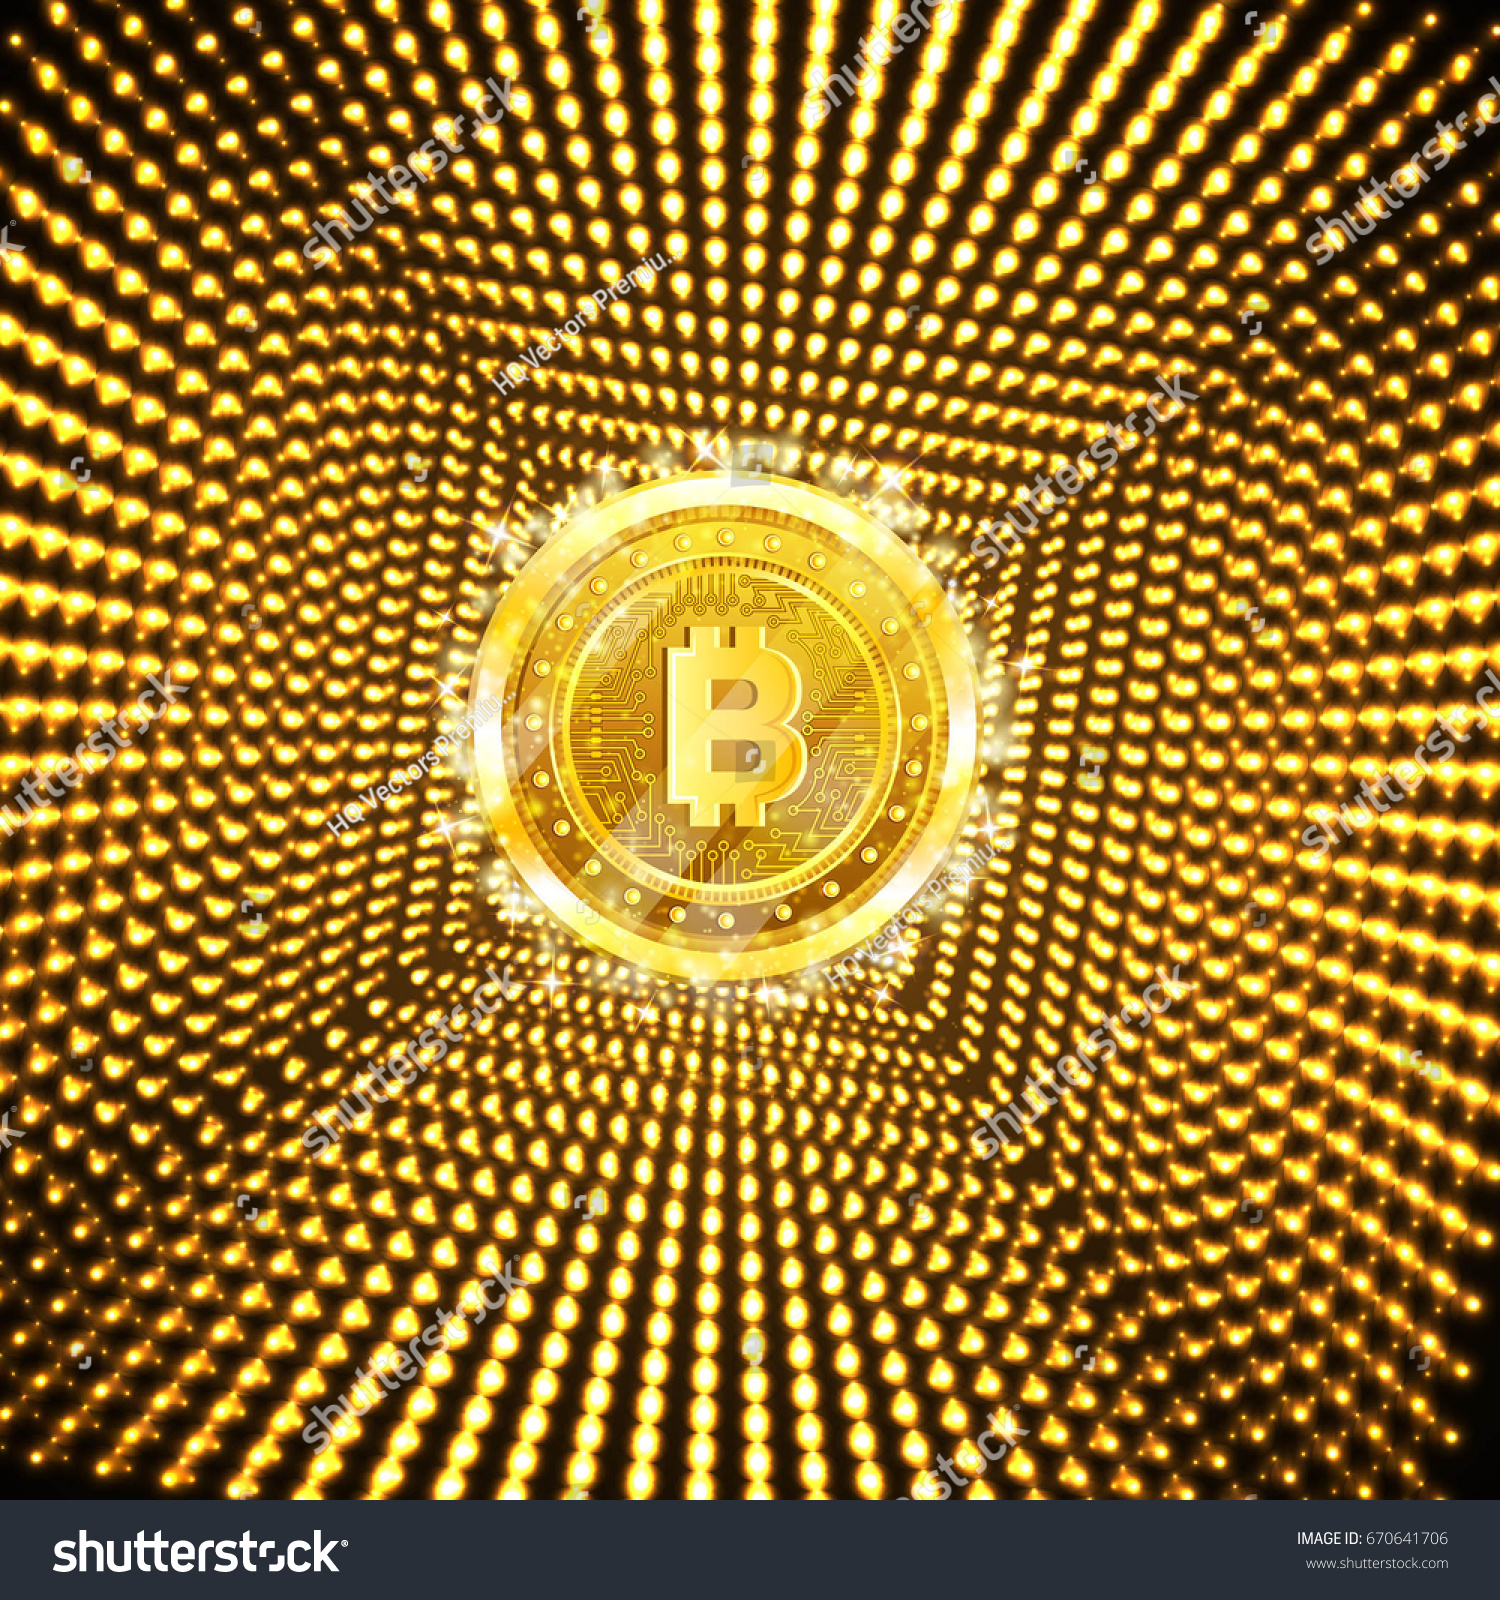 SVG of Golden bit coin in the center of yellow square tunnel from shiny dots svg